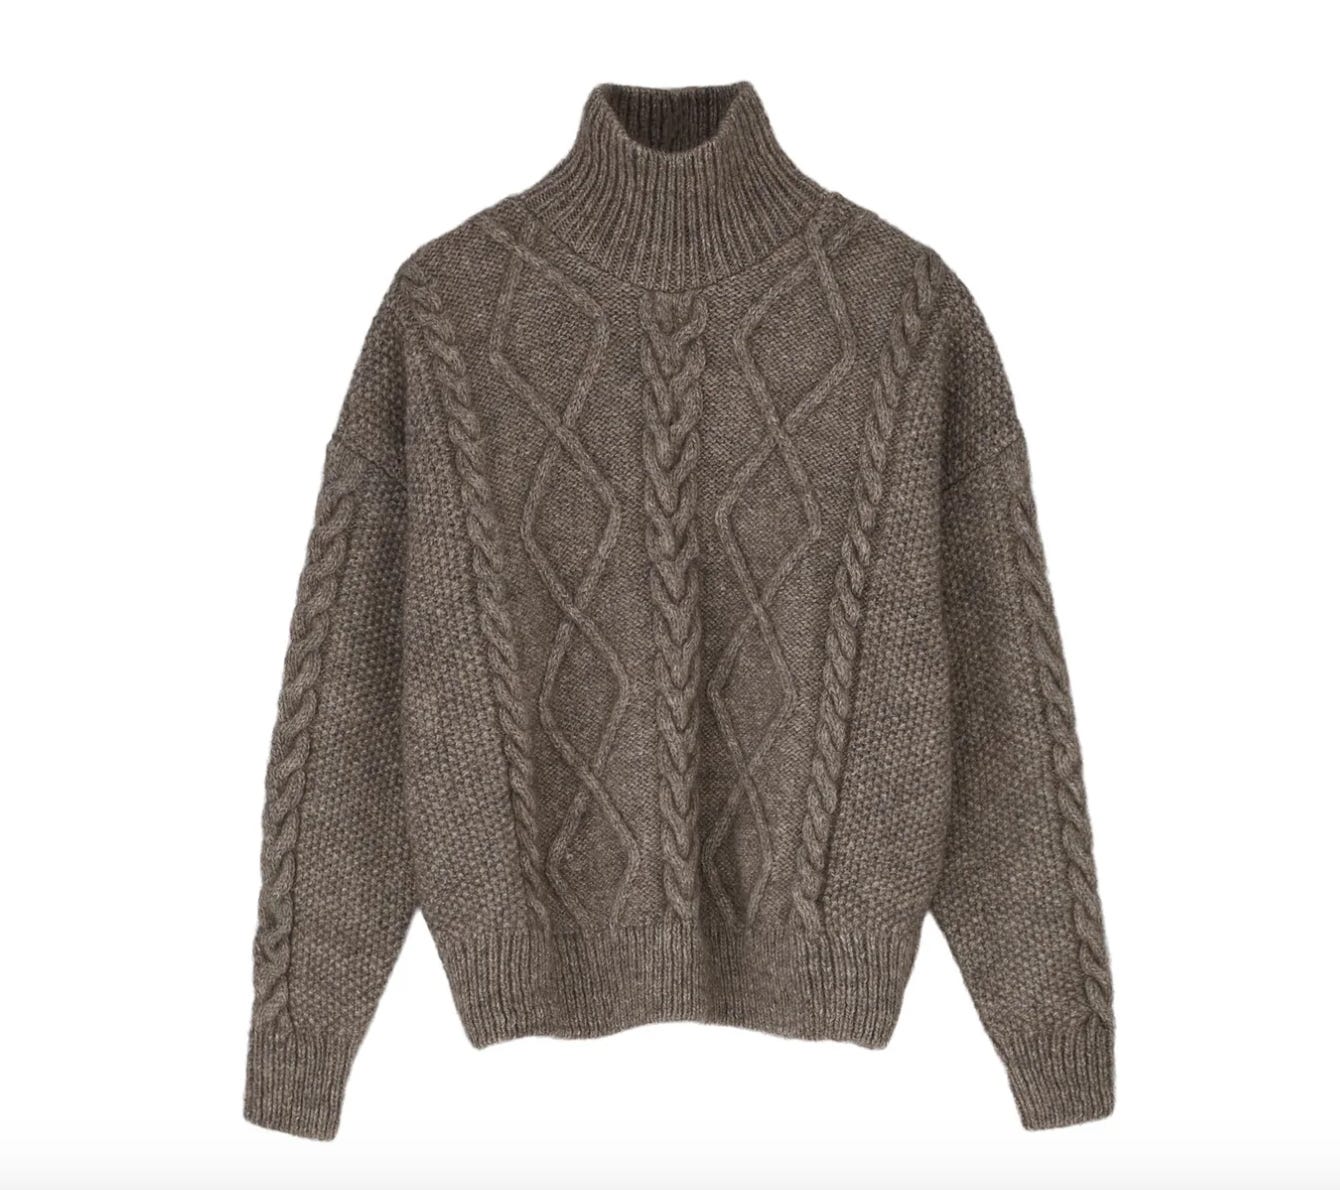 The ideal winter sweater might be a fisherman’s knit